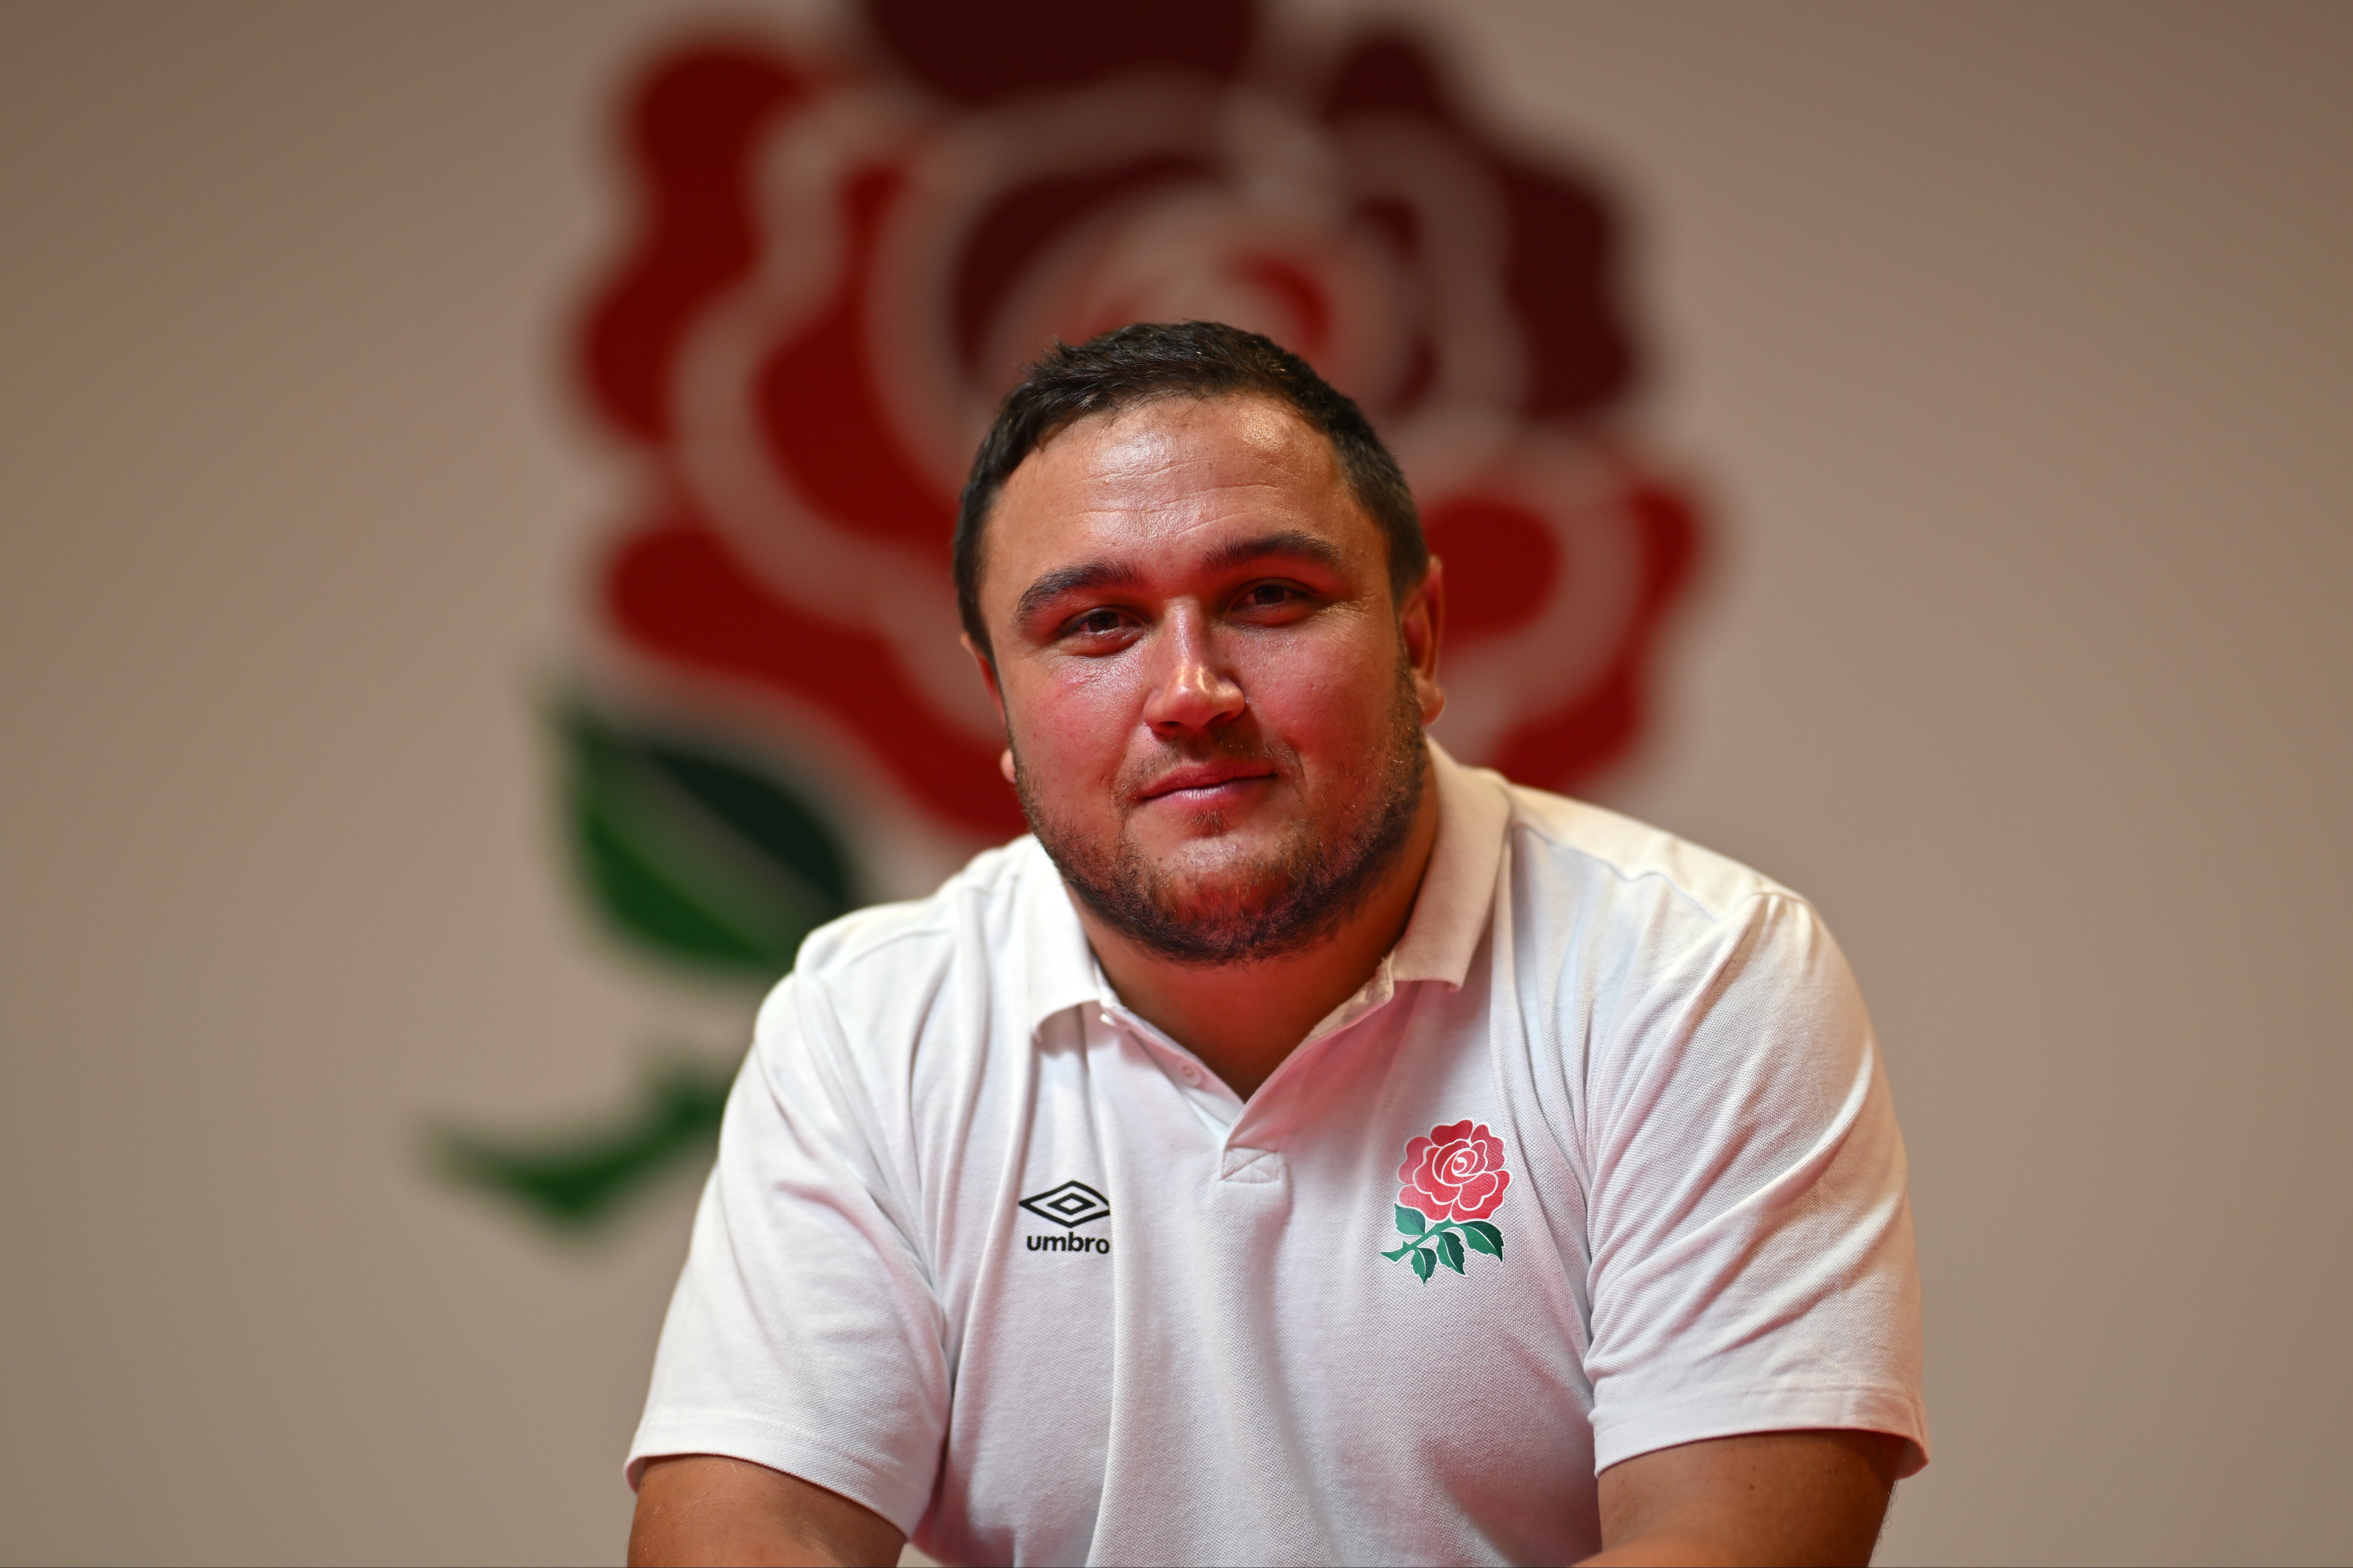 Jamie George will captain England in the Six Nations